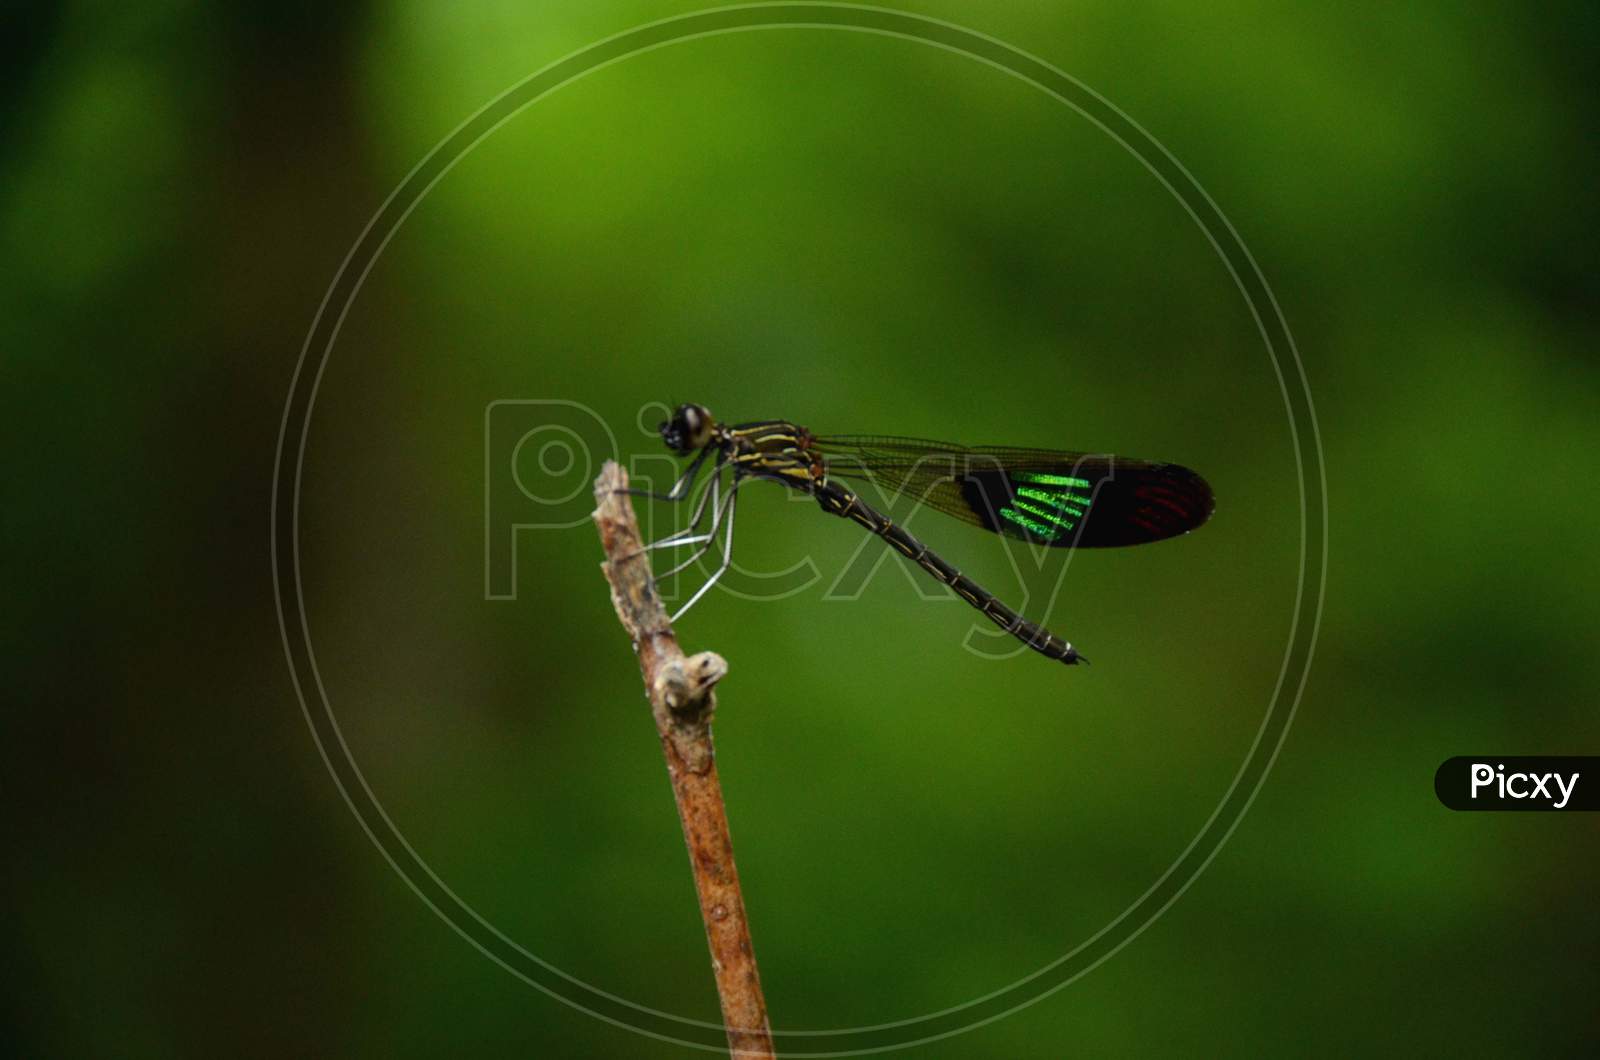 the beautiful small green dragonfly on the plant branch in the forest.